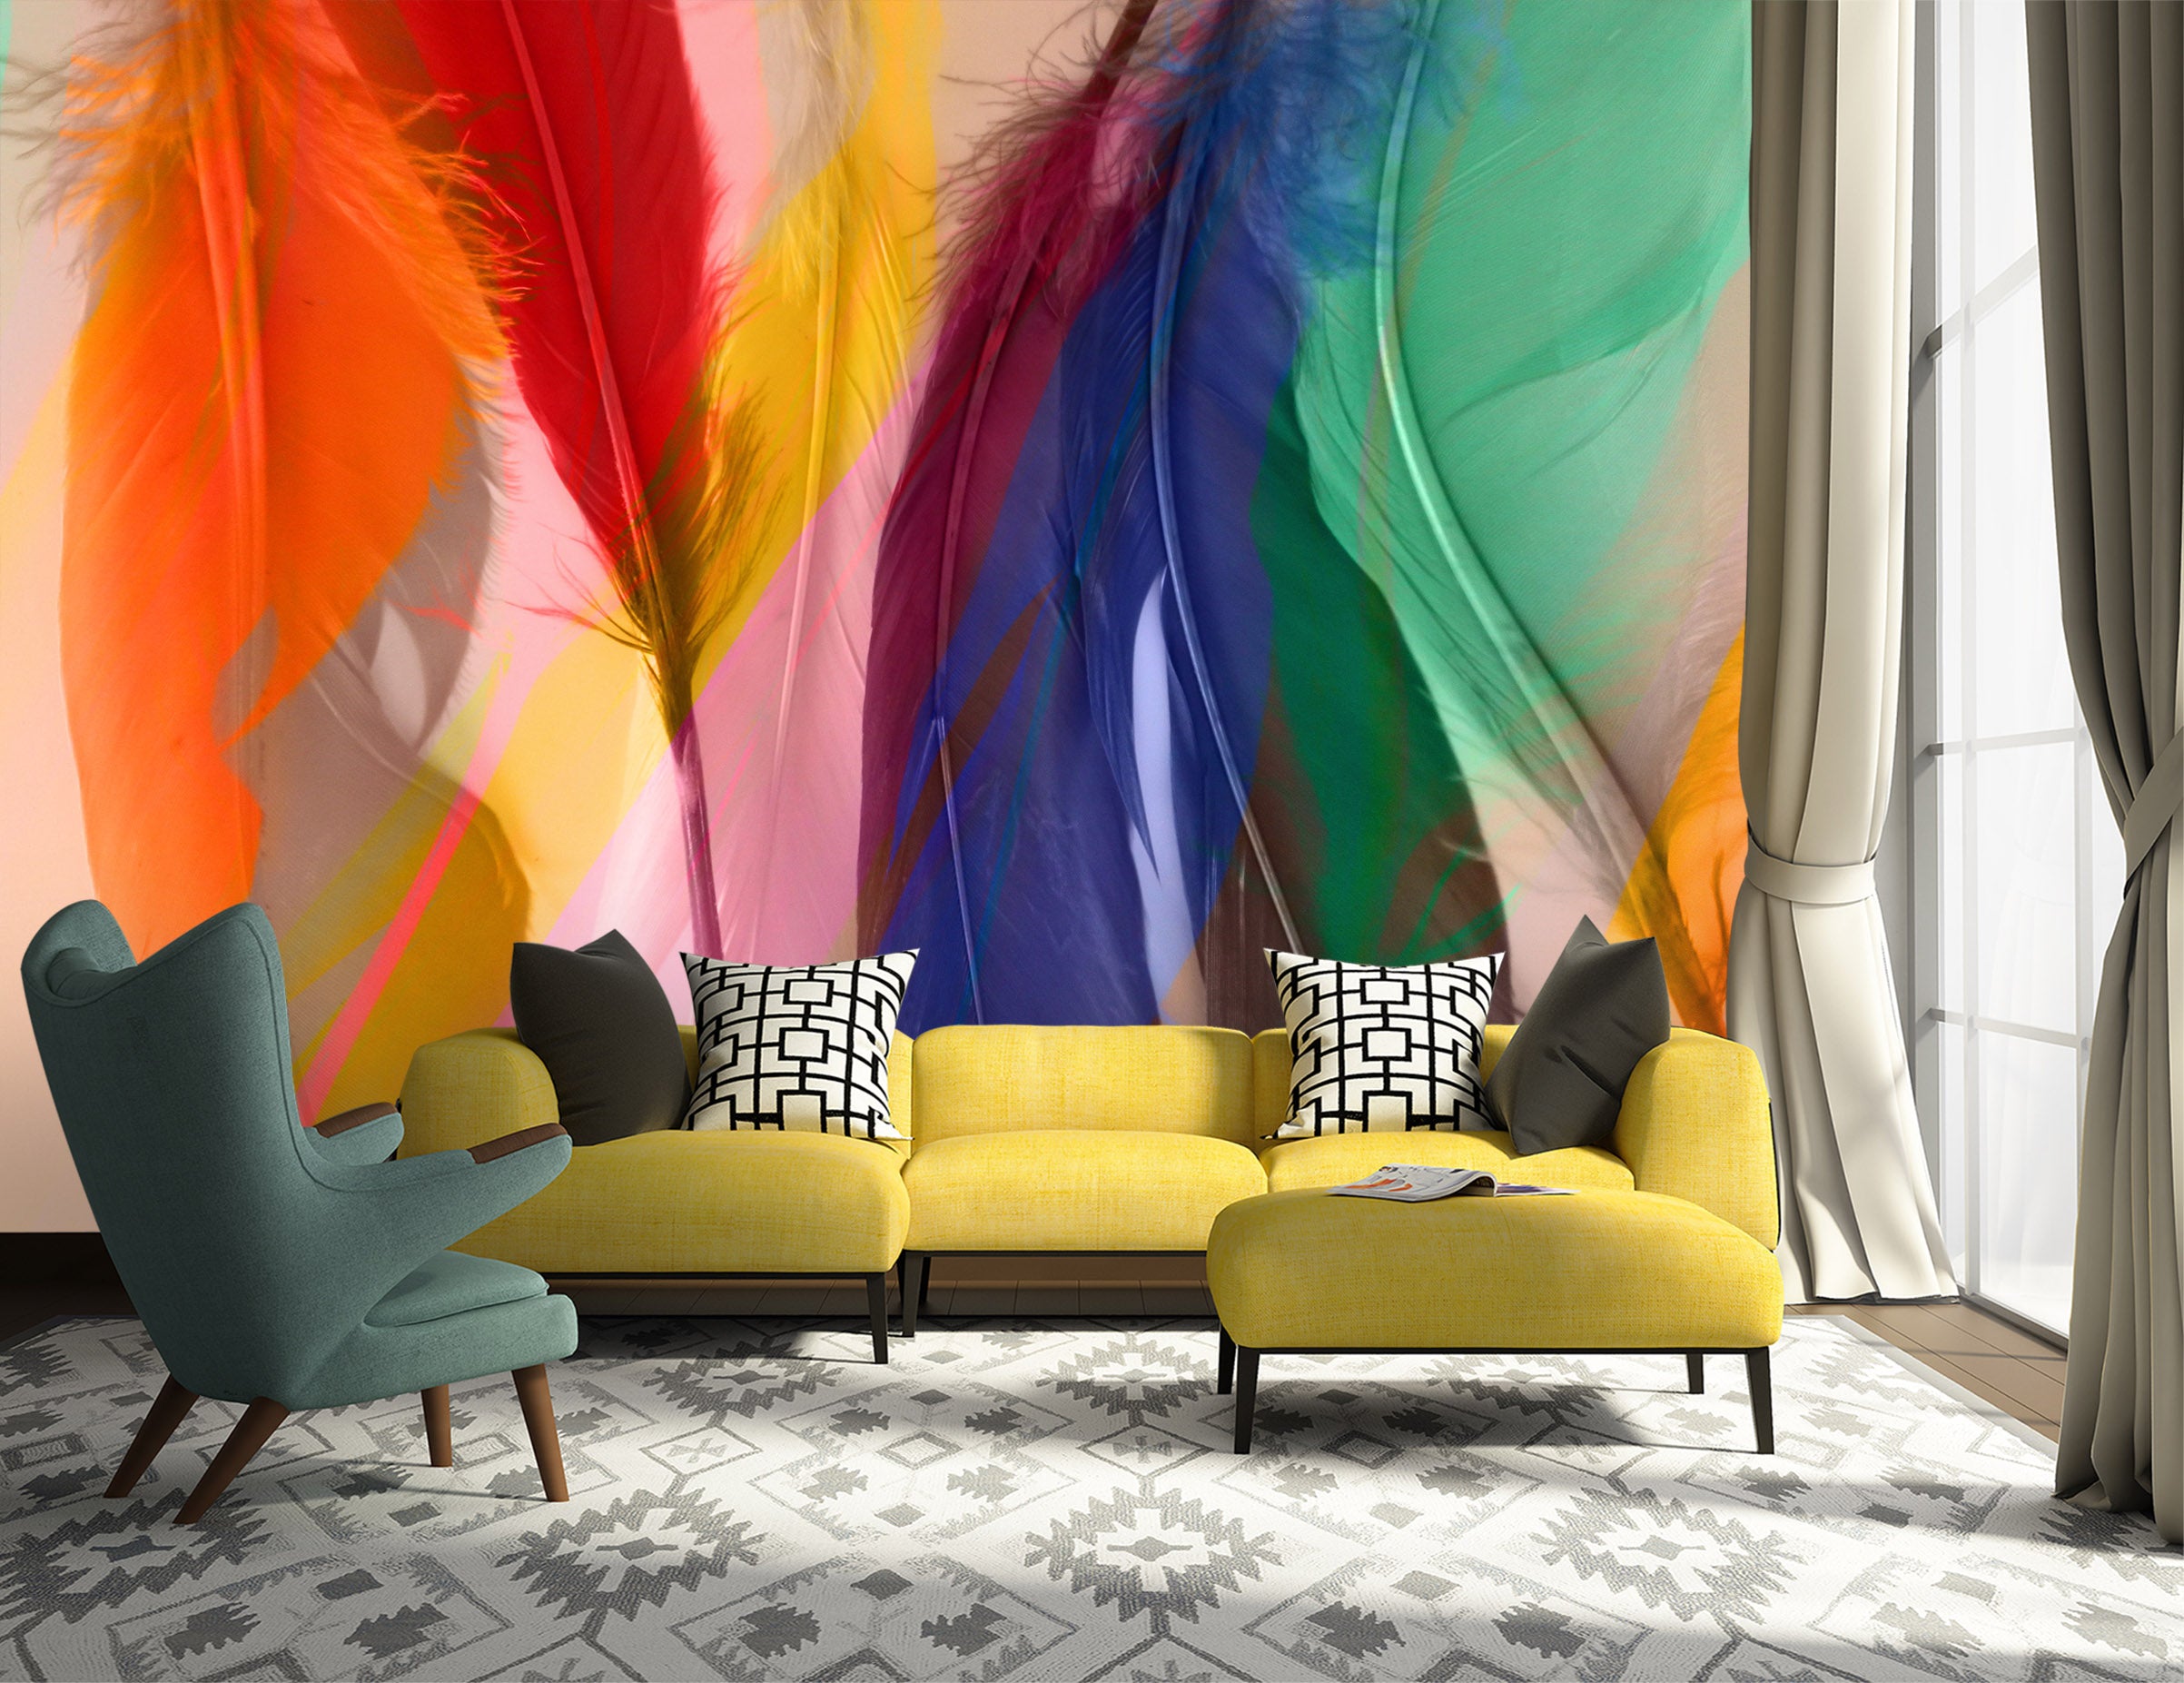 3D Colored Feathers 71081 Shandra Smith Wall Mural Wall Murals